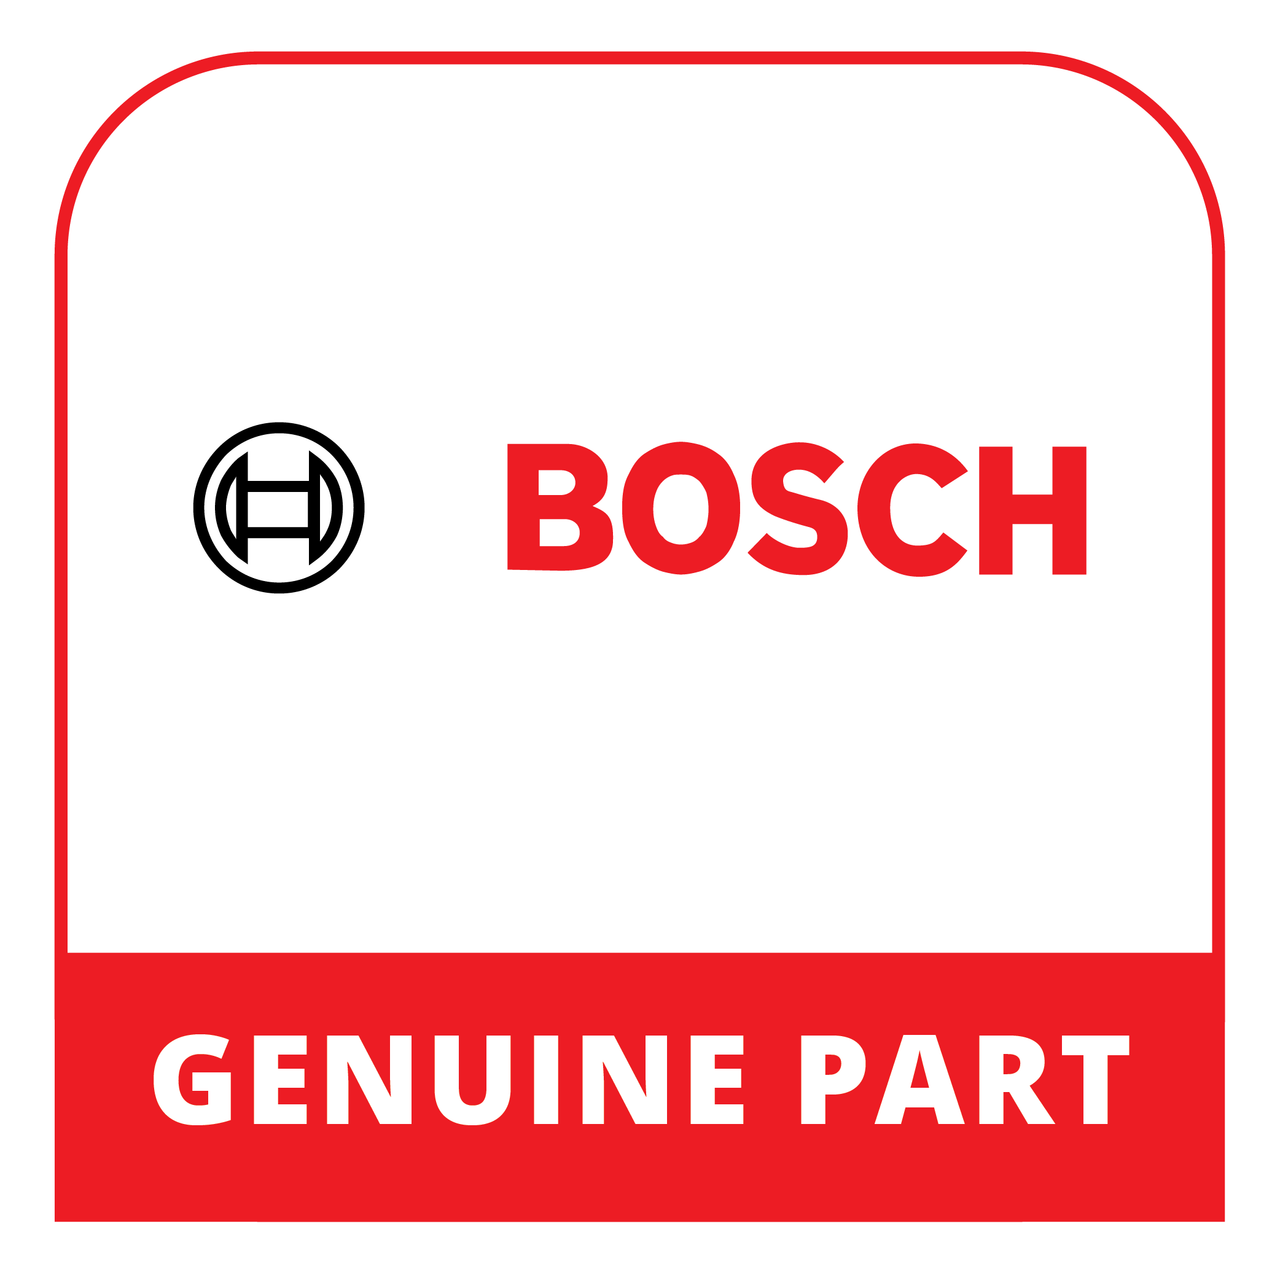 Bosch (Thermador) 20000393 - Panel Side - Genuine Bosch (Thermador) Part